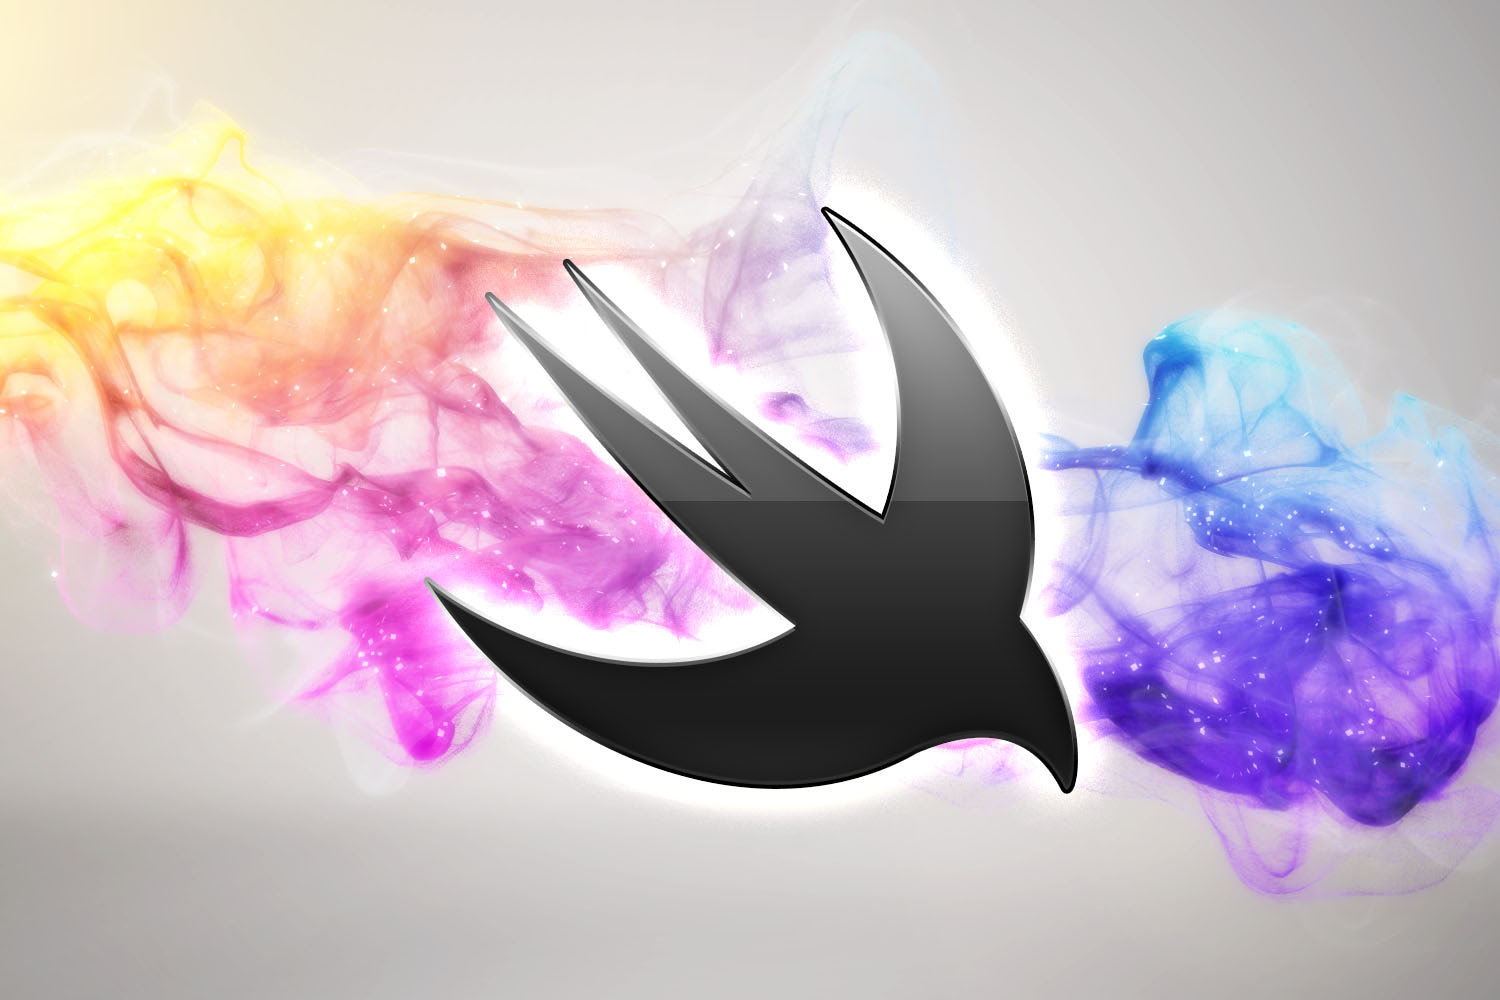 What's new in Swift 5.0 – Hacking with Swift